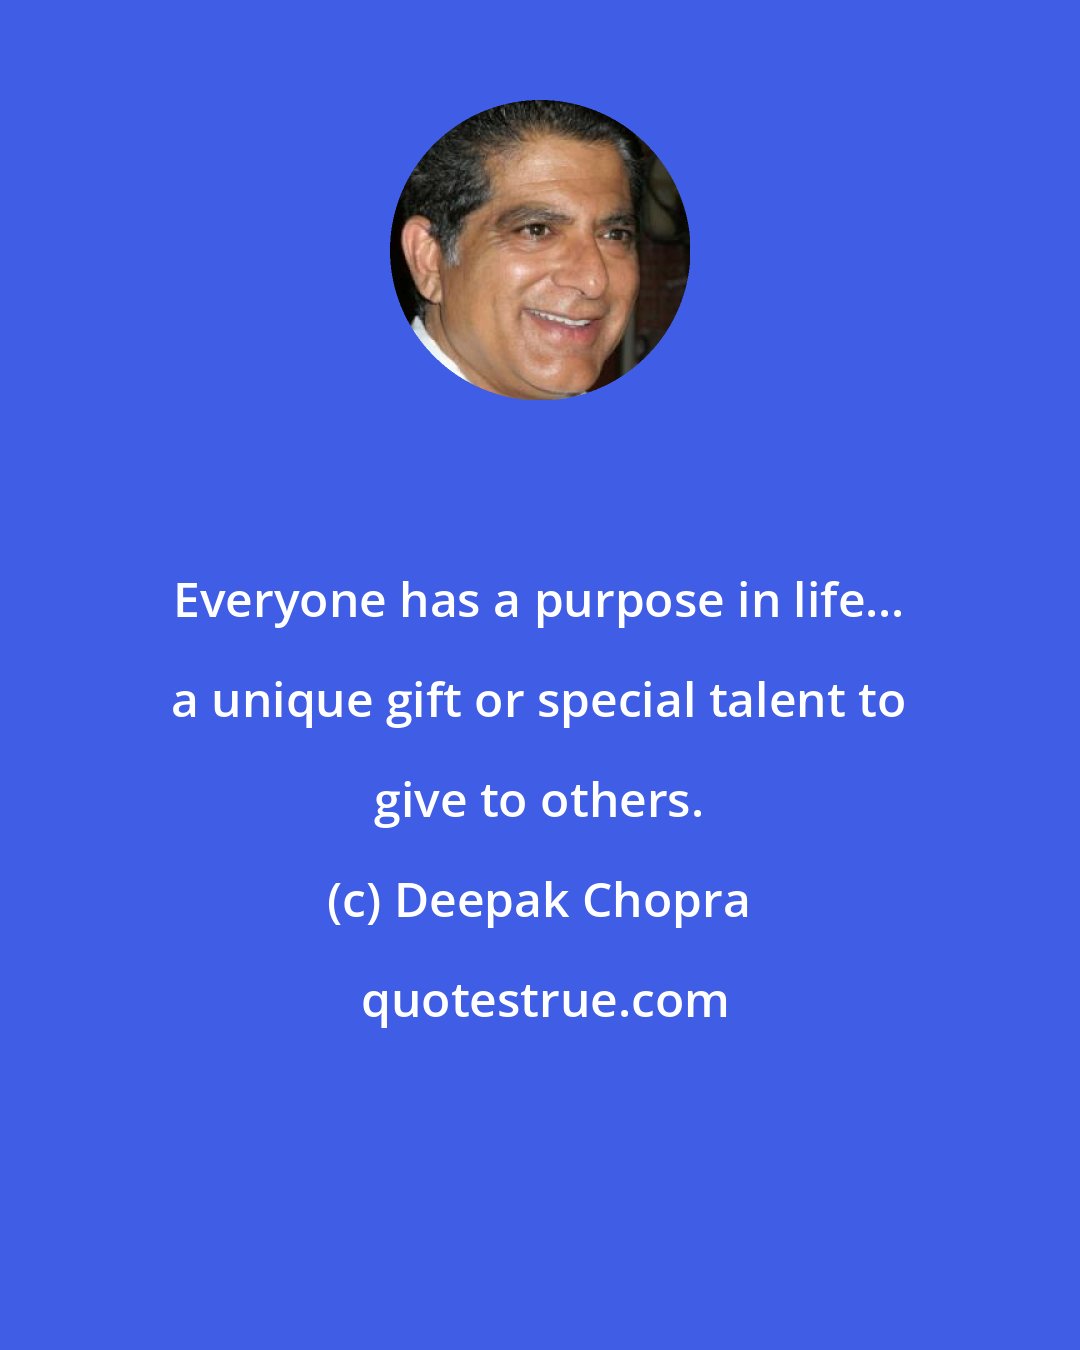 Deepak Chopra: Everyone has a purpose in life... a unique gift or special talent to give to others.